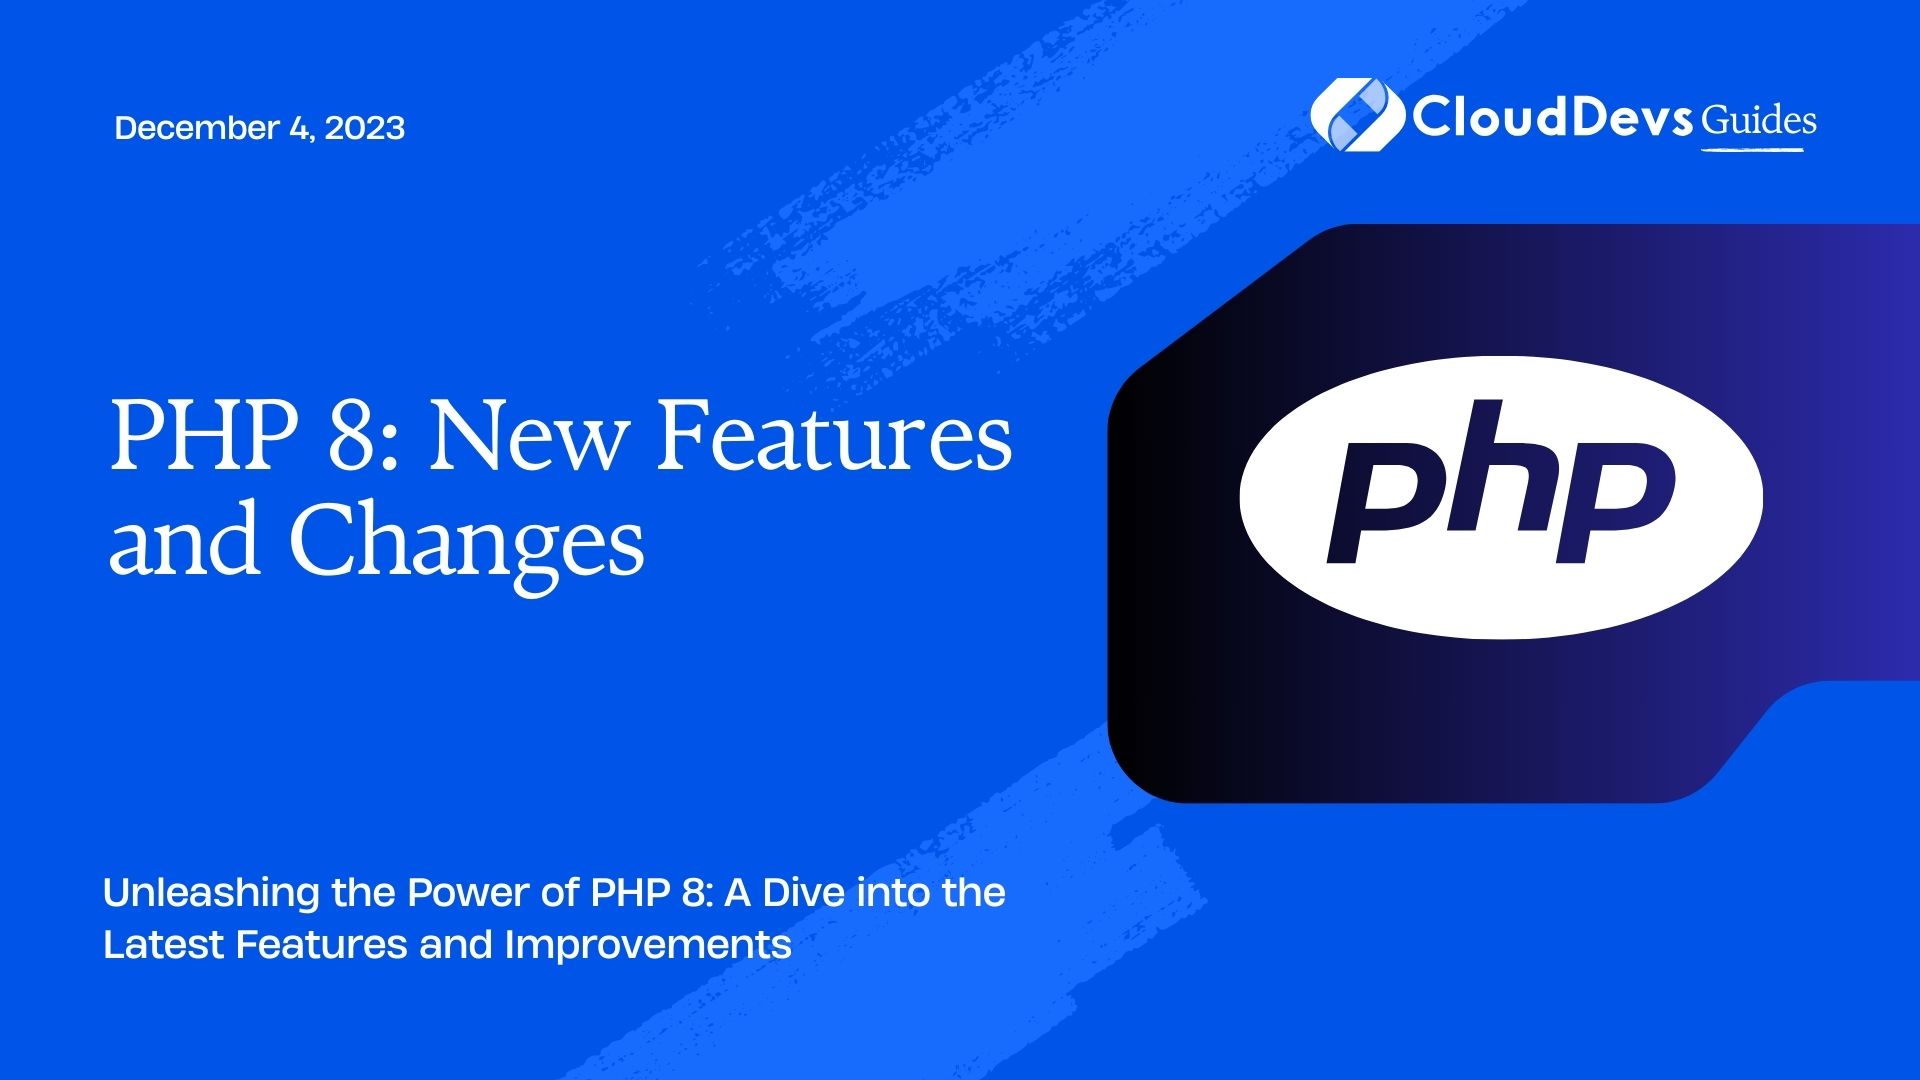 PHP 8: New Features and Changes